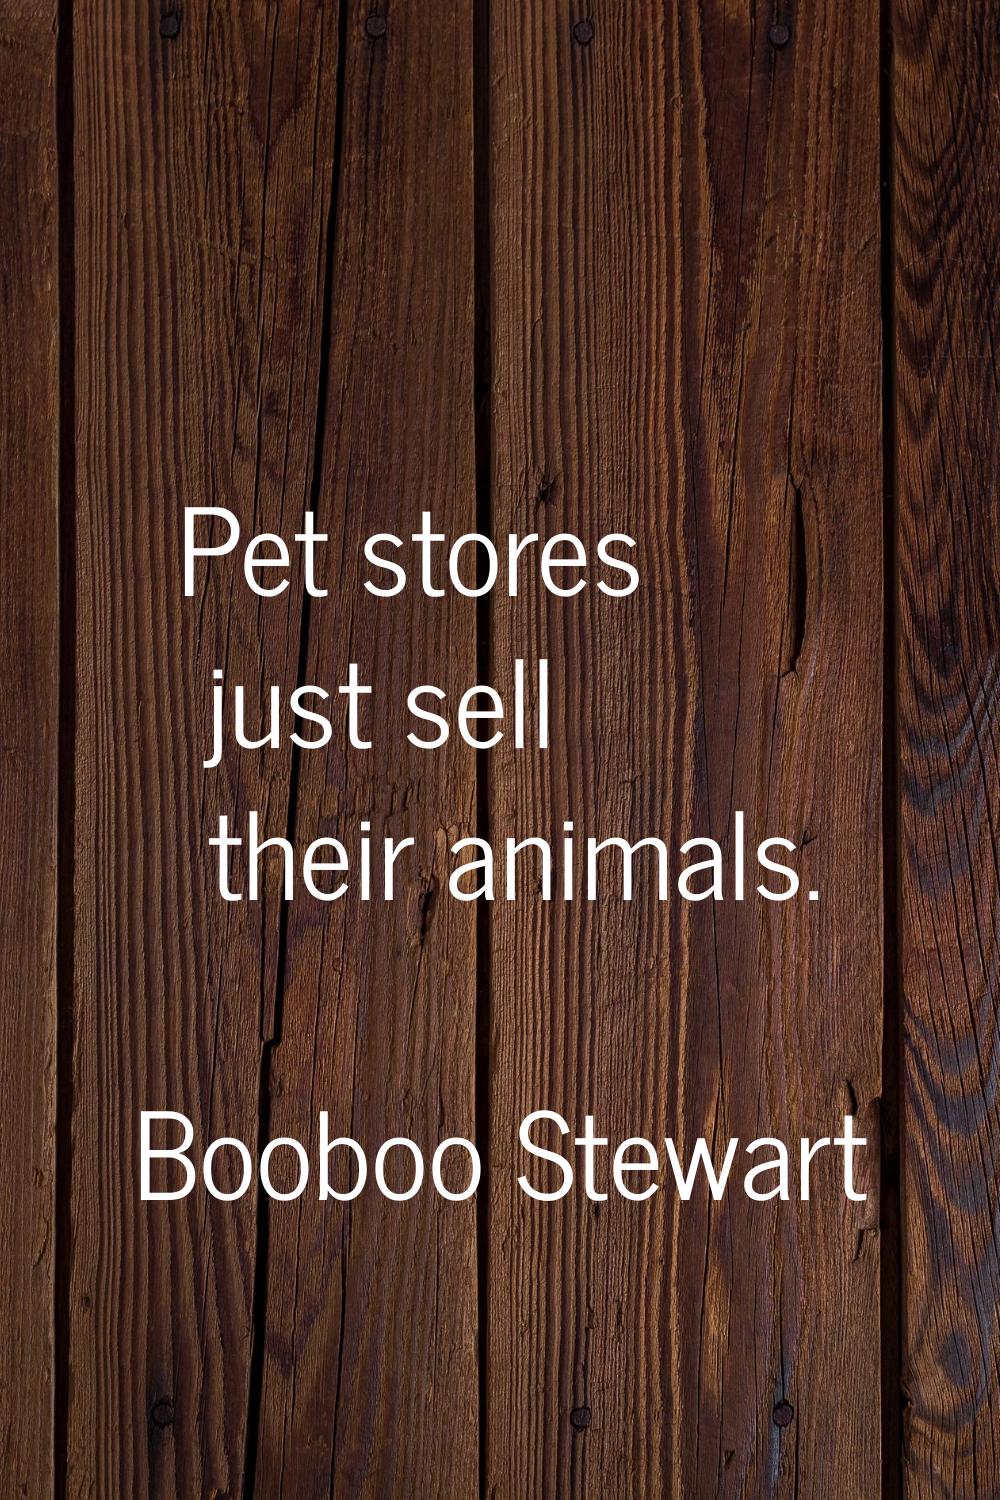 Pet stores just sell their animals.